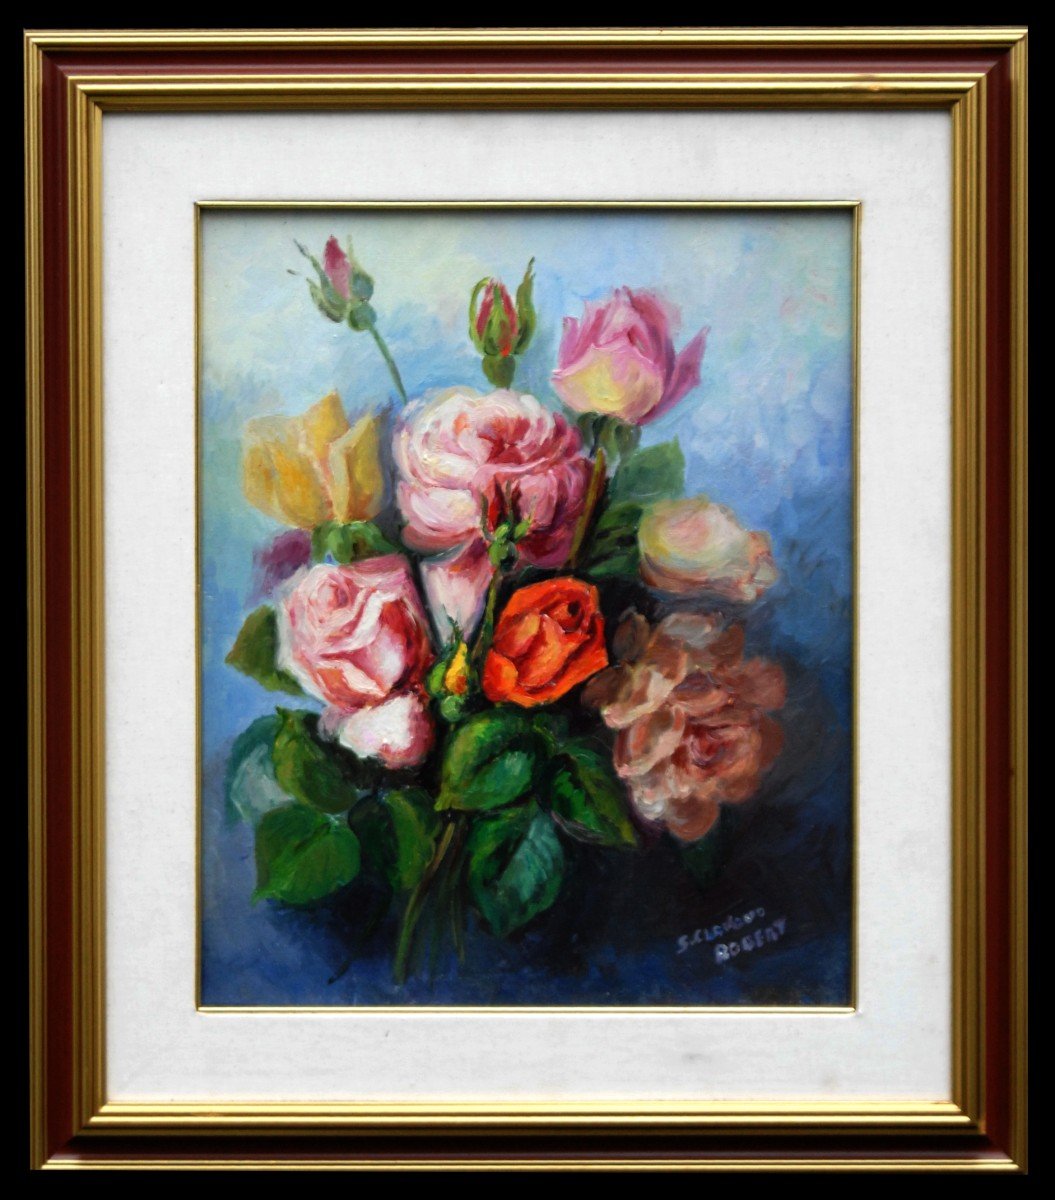 Painting, Oil Painting On Canvas With Bouquet Of Flowers.